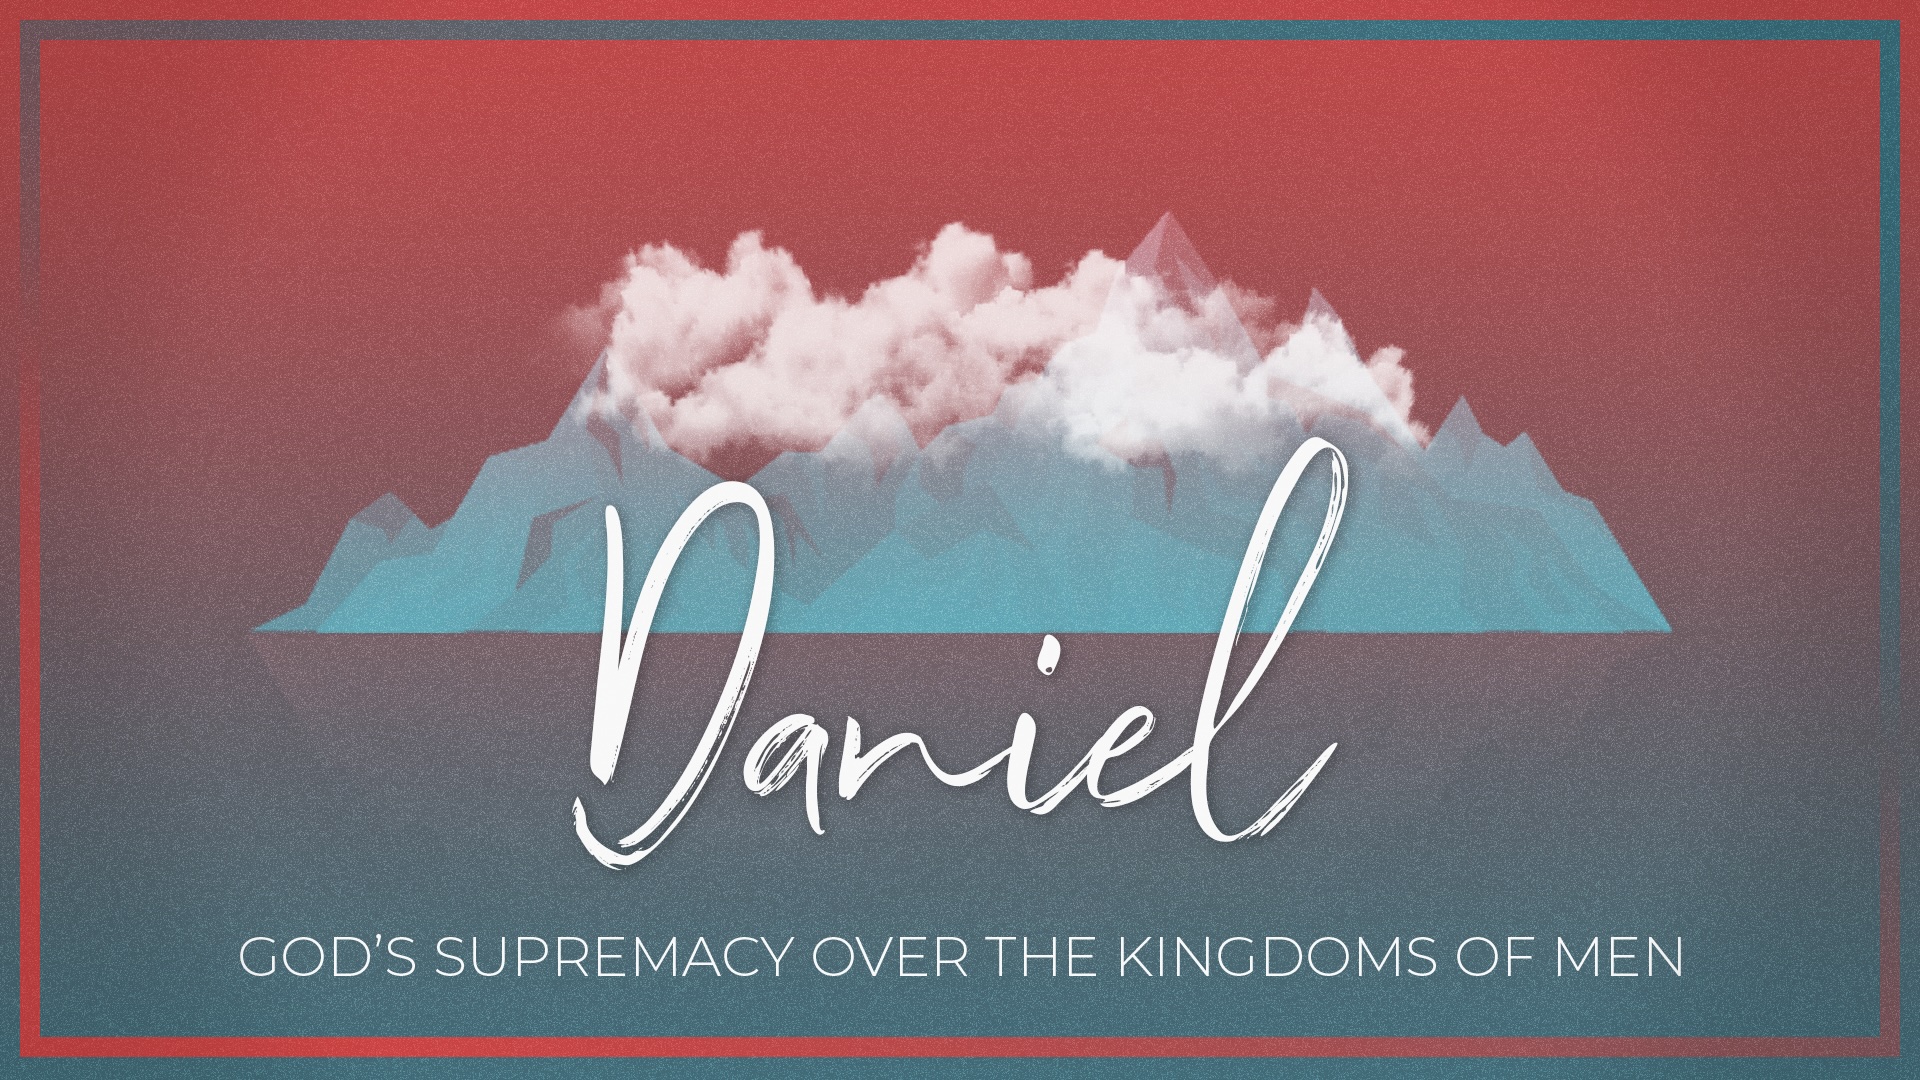 Introduction to Daniel